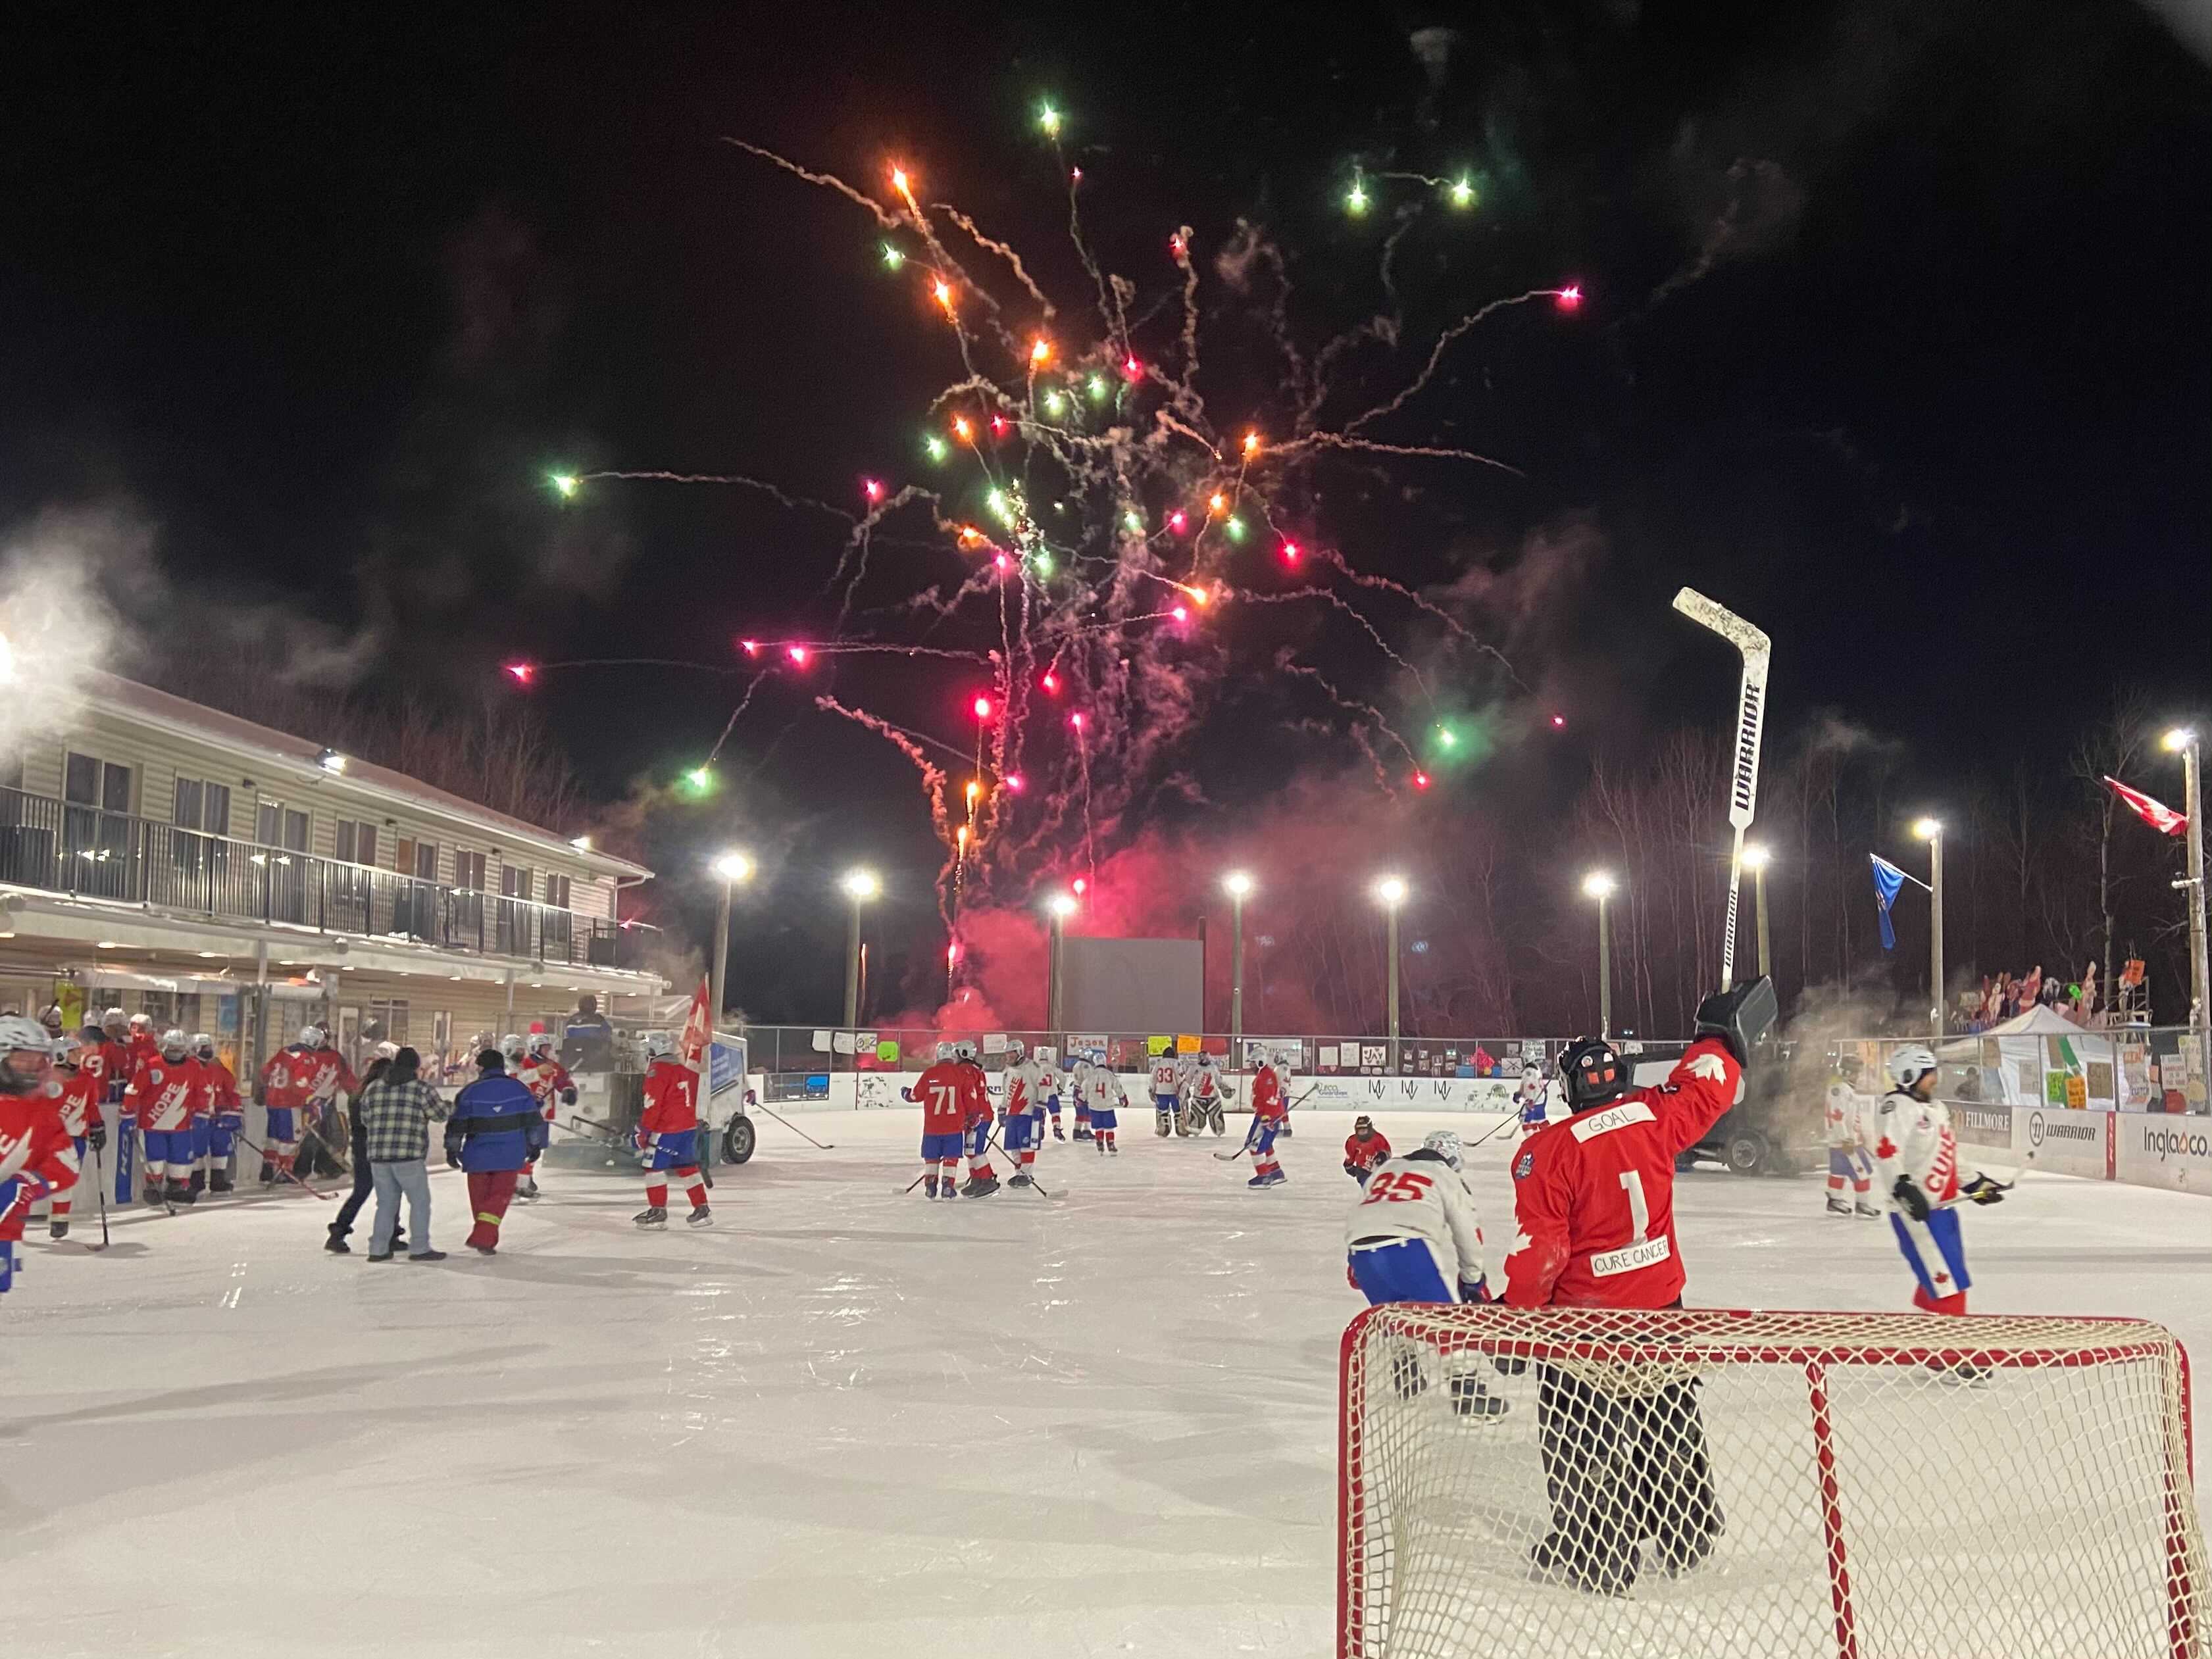 World’s Longest Hockey Game wraps up east of Edmonton after 252 hours